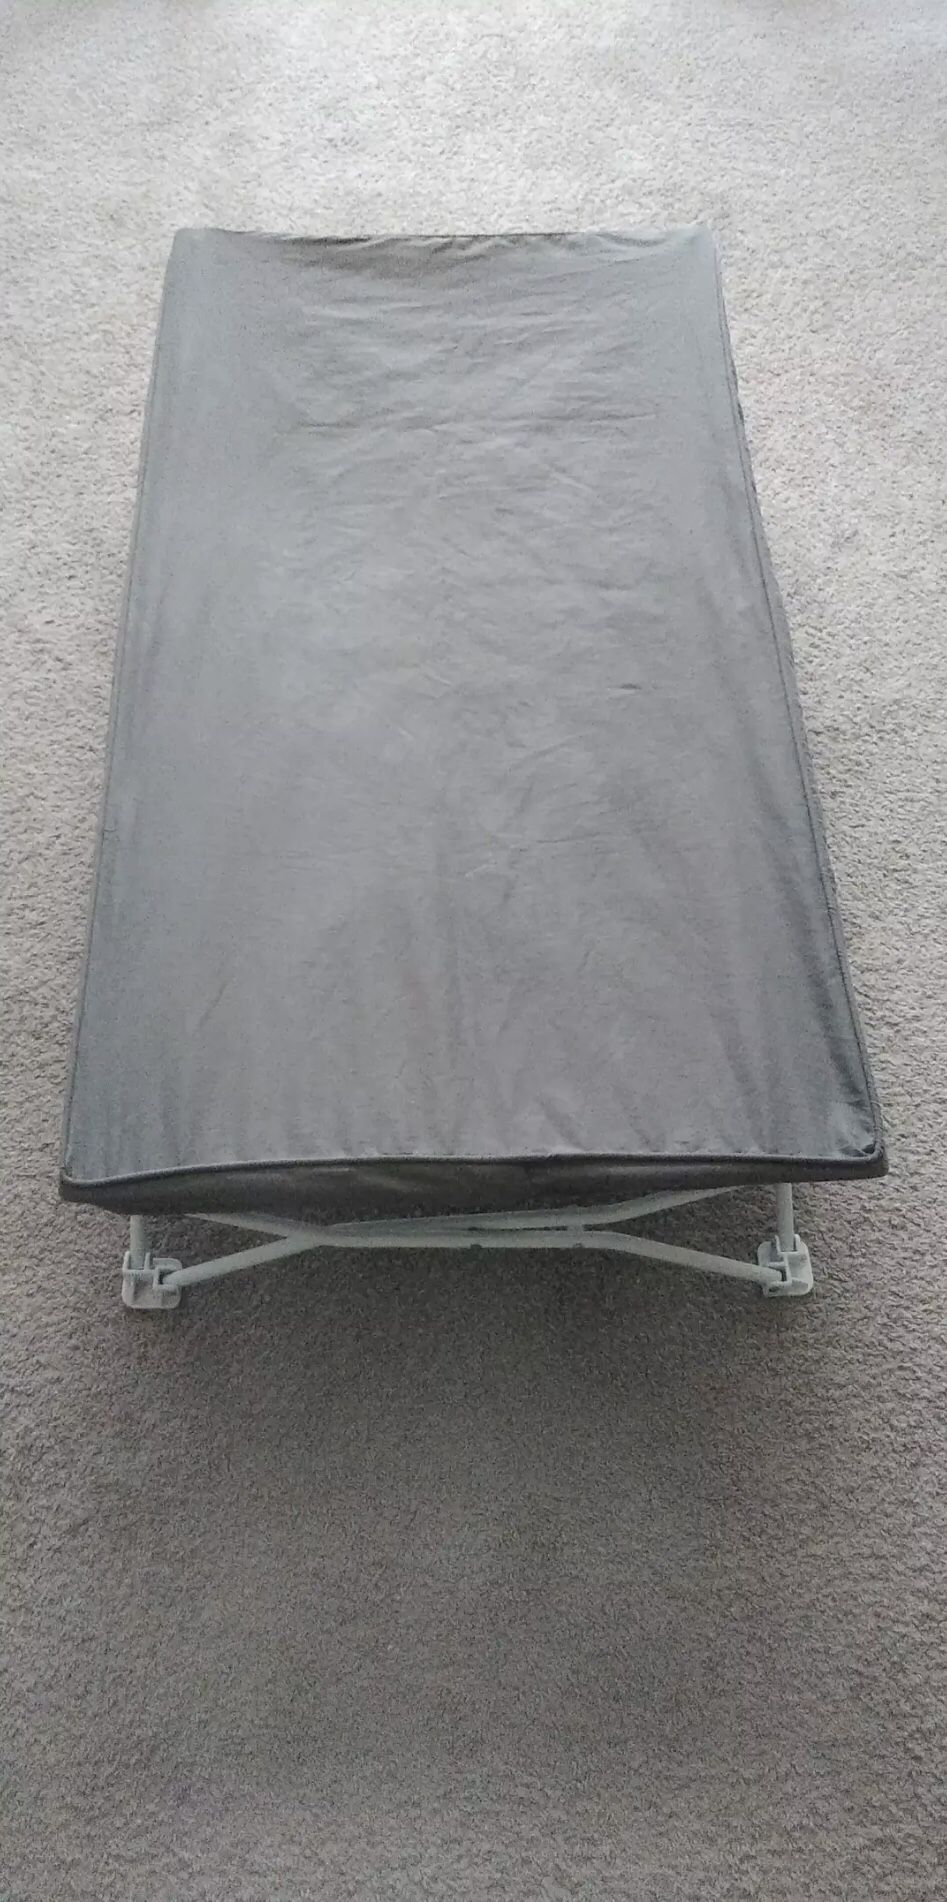 Regalo My Cot Portable Travel Bed, Includes Fitted Sheet, Grey .